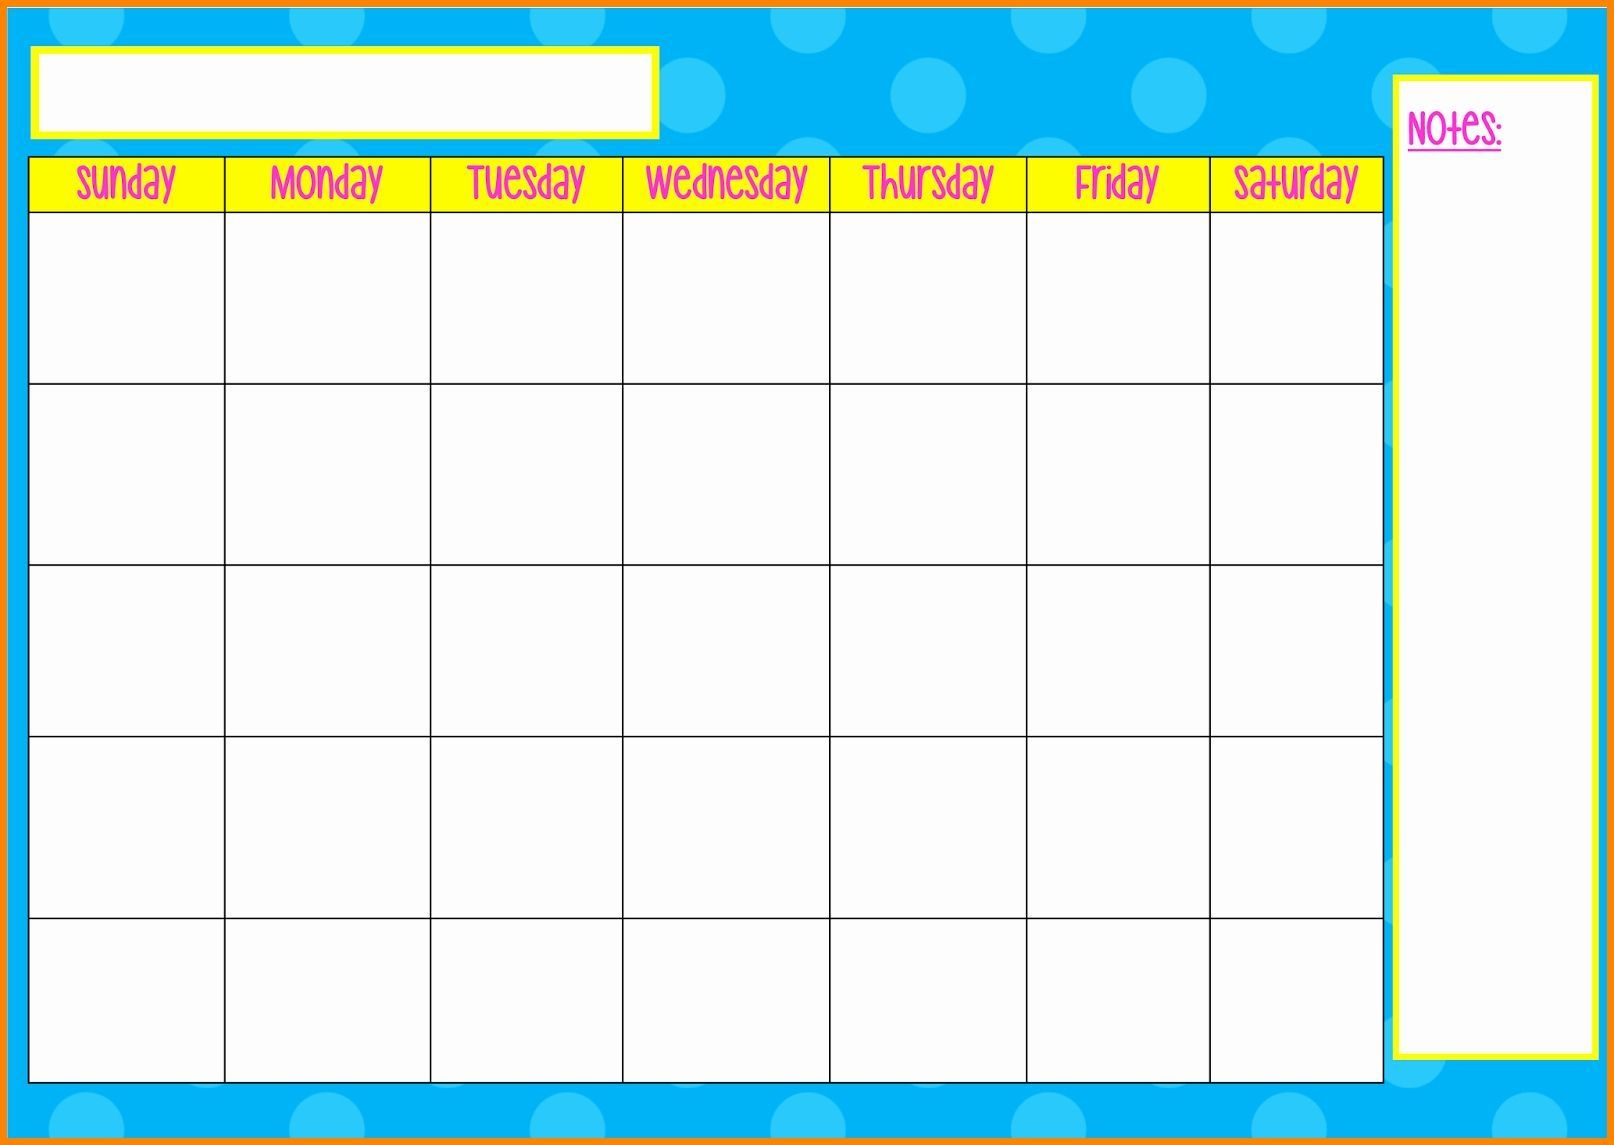 How To Monday Through Friday Calendar Word | Get Your Free Monthly Templates Starting Monday